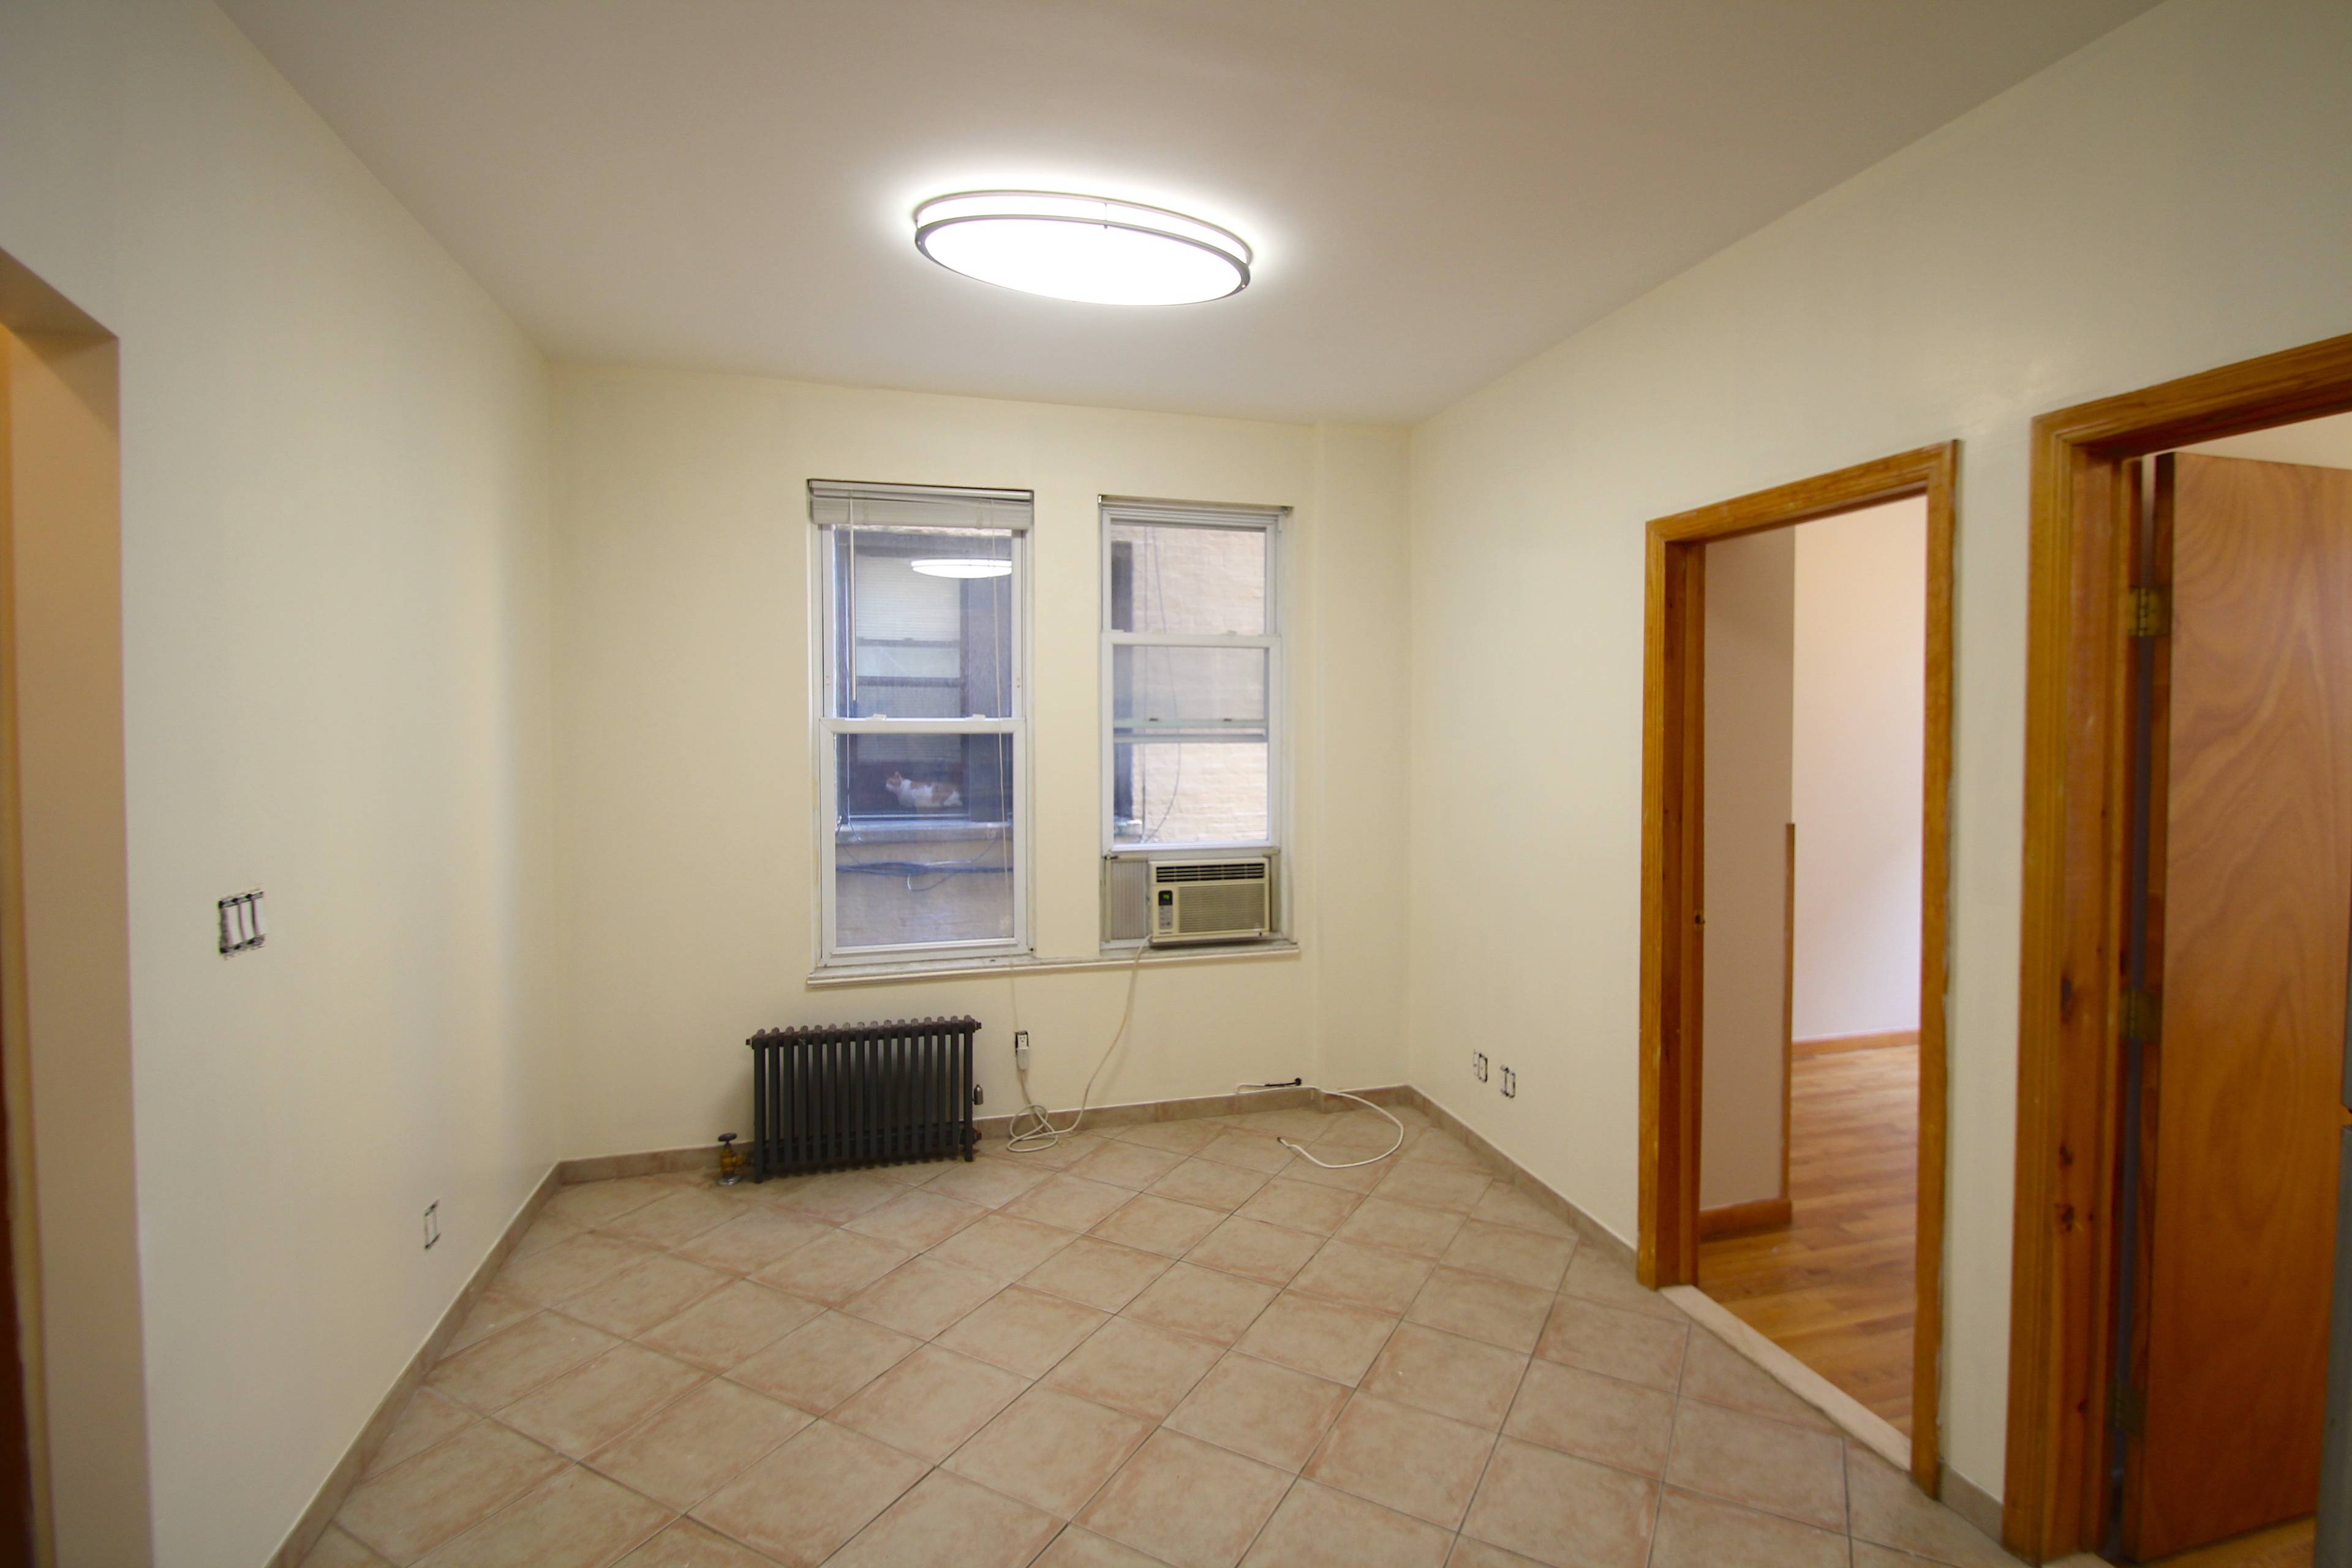 Astoria: 2 Bedroom for Rent Off 30th Ave with Dishwasher!